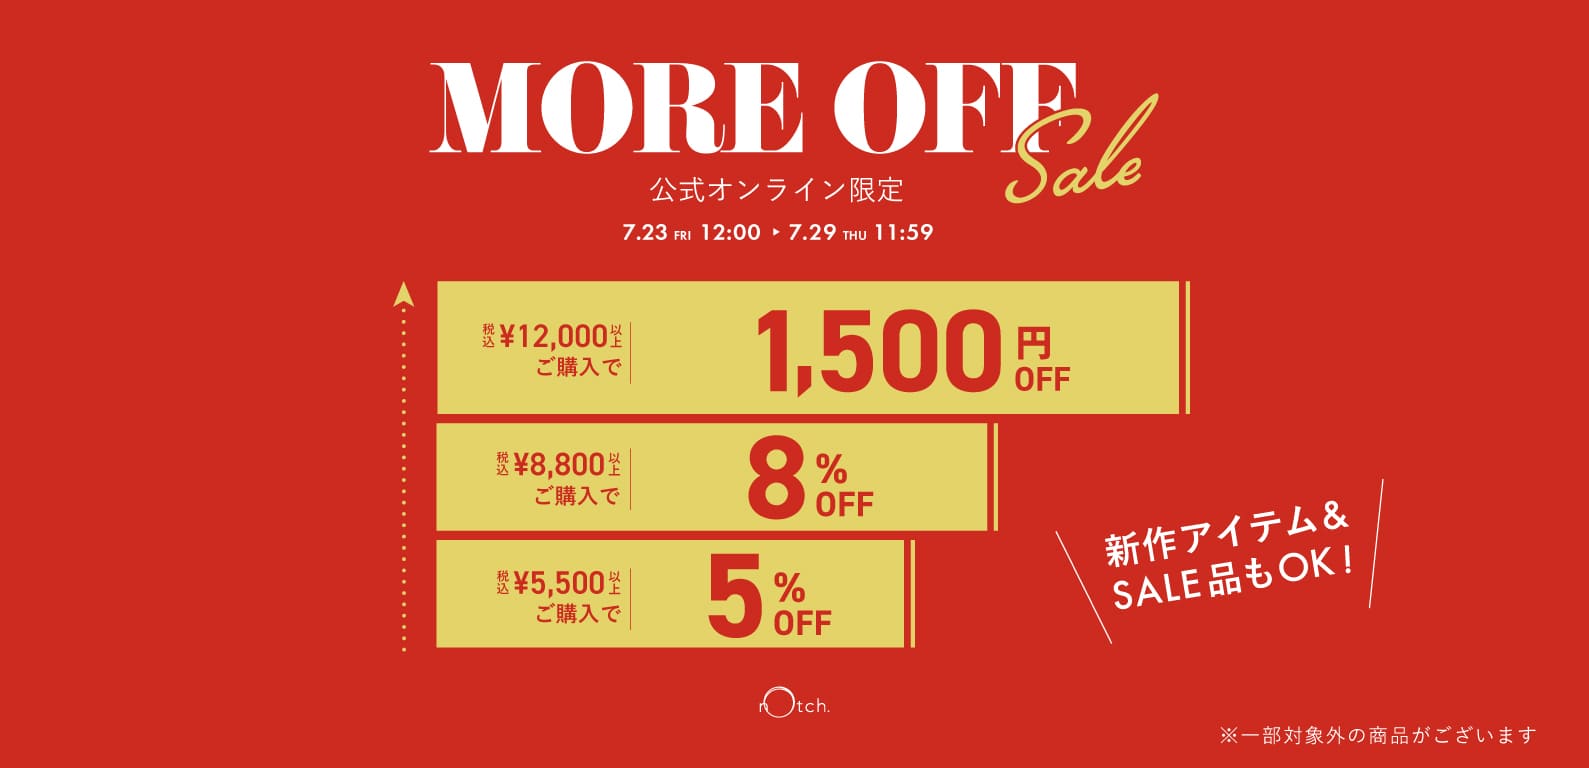 TDC | more OFF SALE